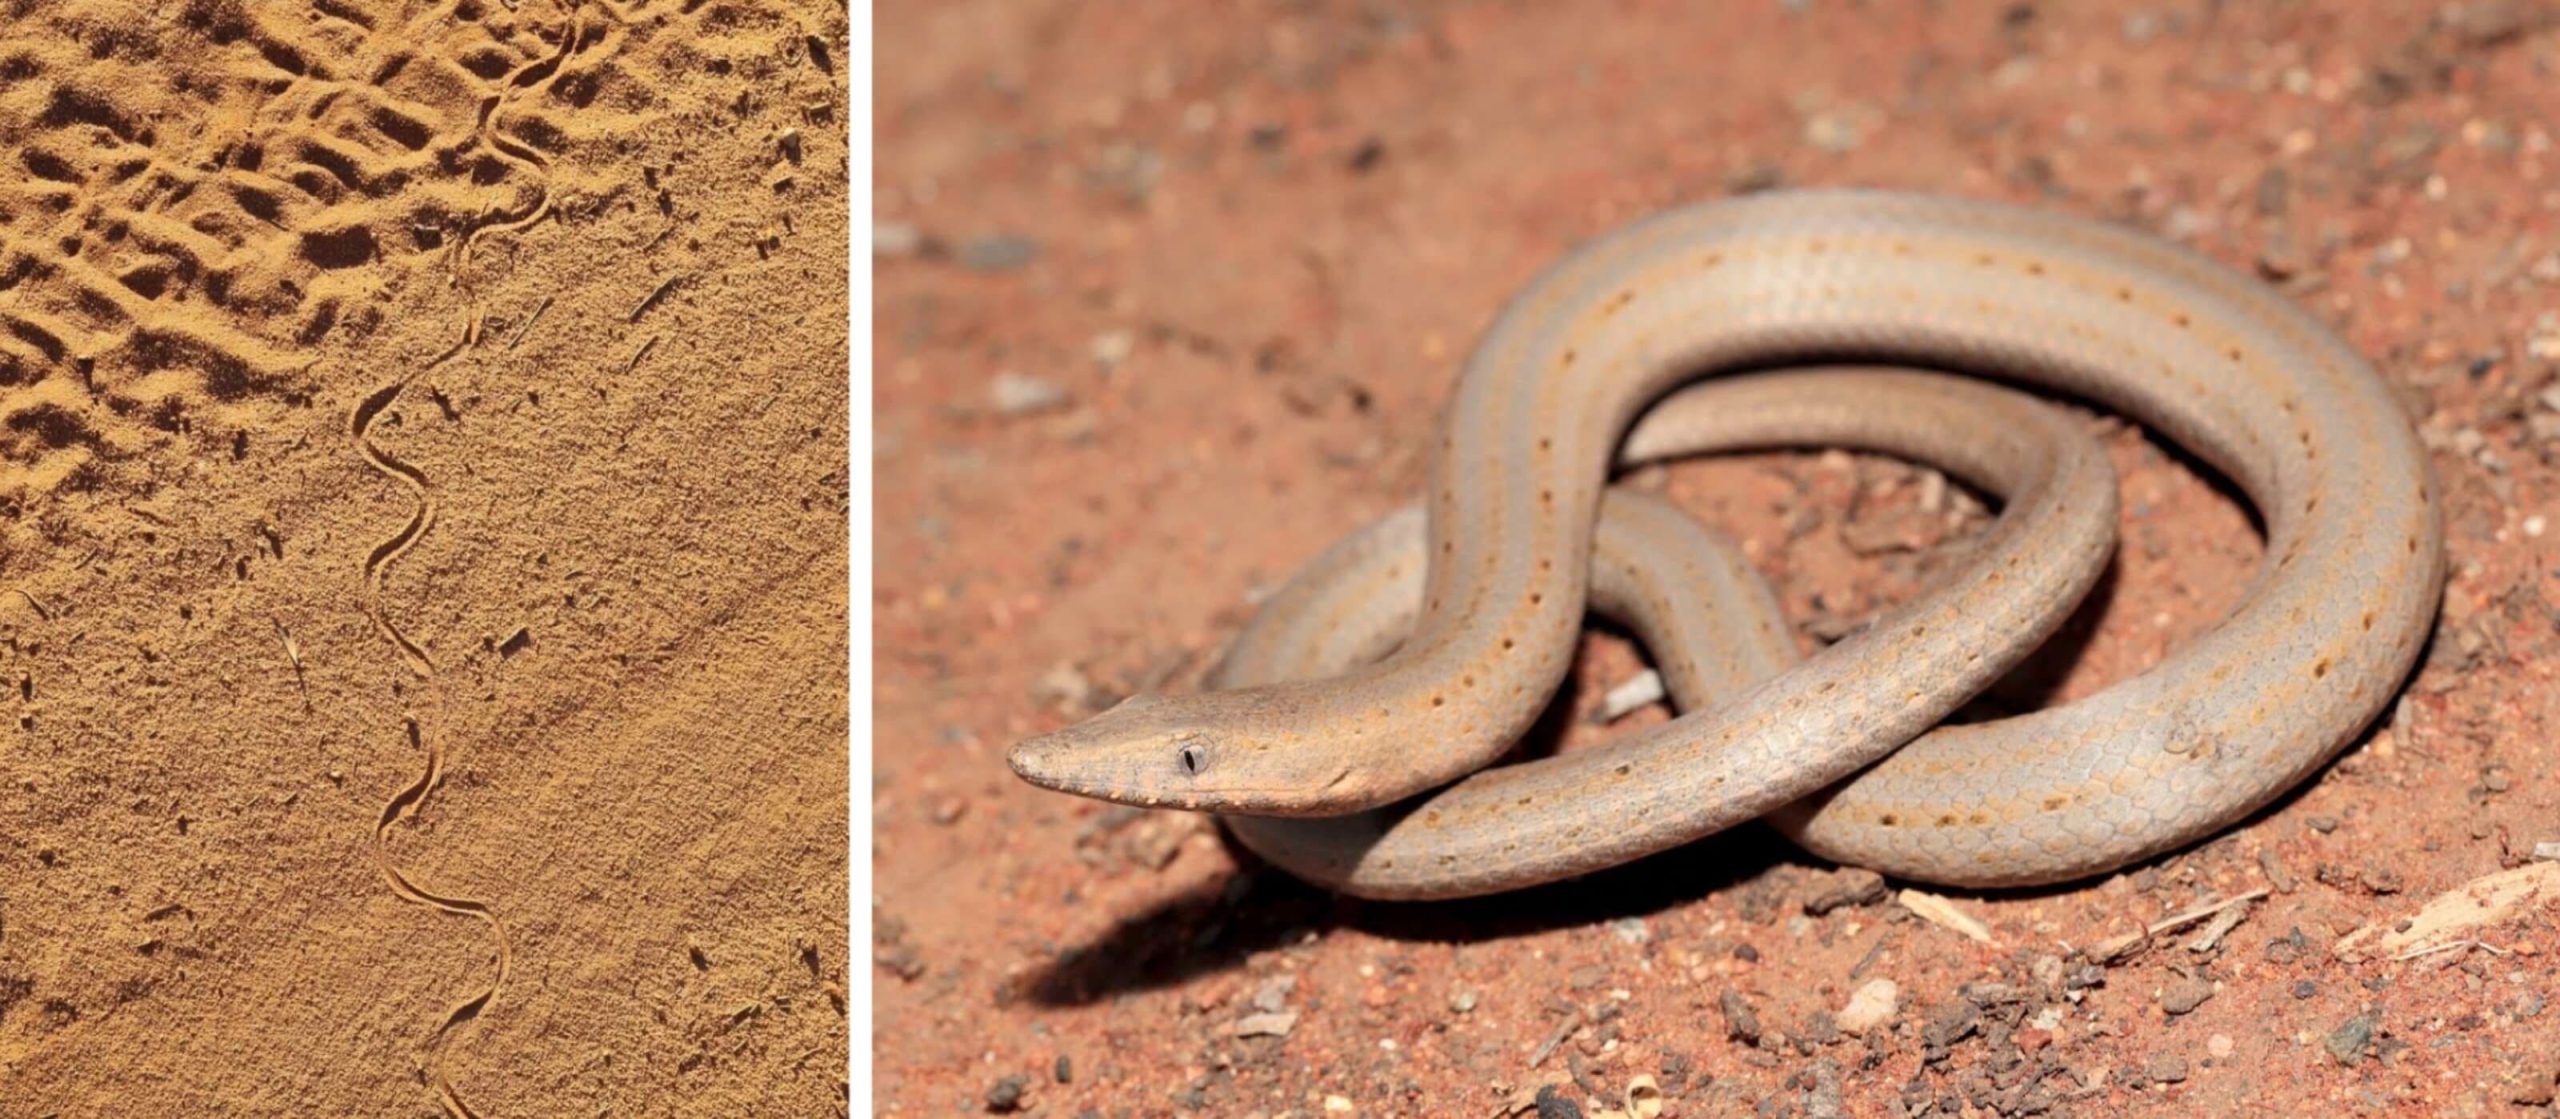 Scientists Discover Four Mysterious Tracks, None Belonging to Snakes